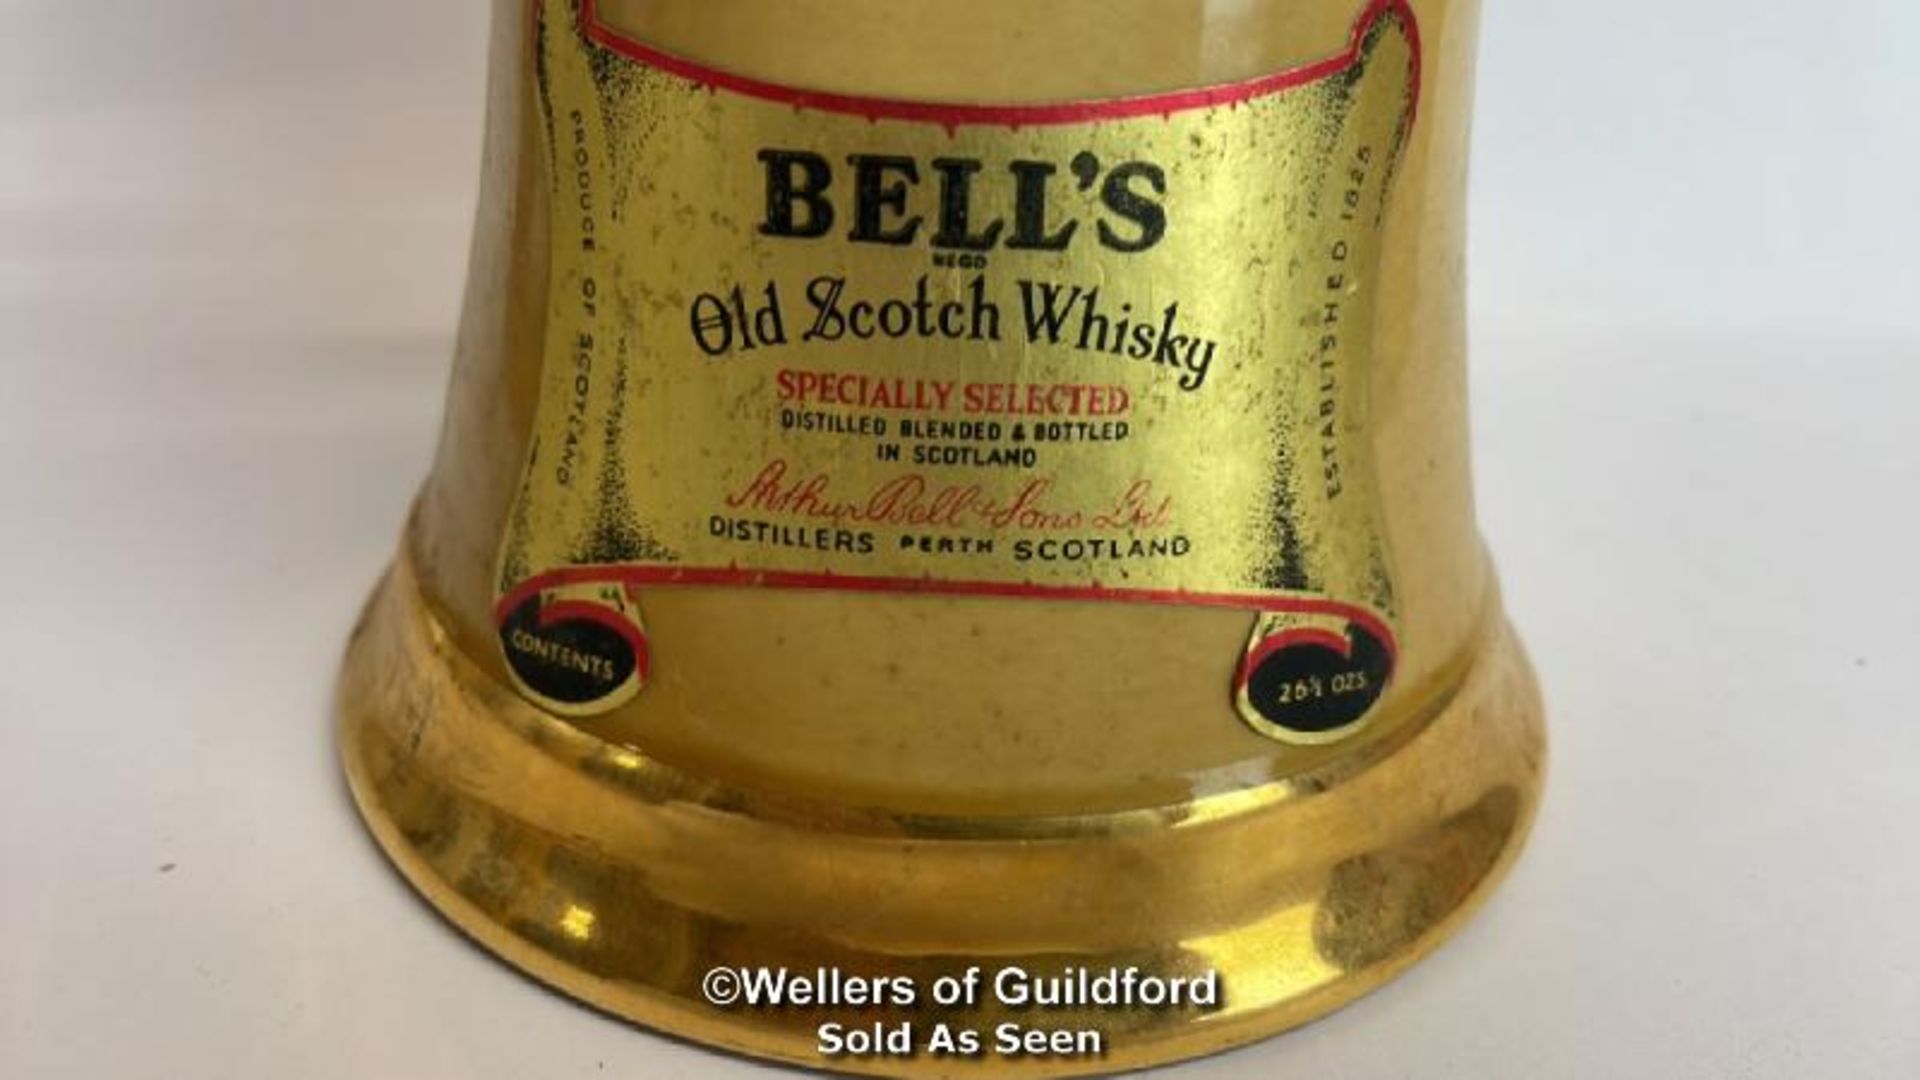 Bell's Specially Selected Blended Scotch Whisky, Bottle made by Wade, 26.5 OZ, 40% vol / Please - Image 4 of 10